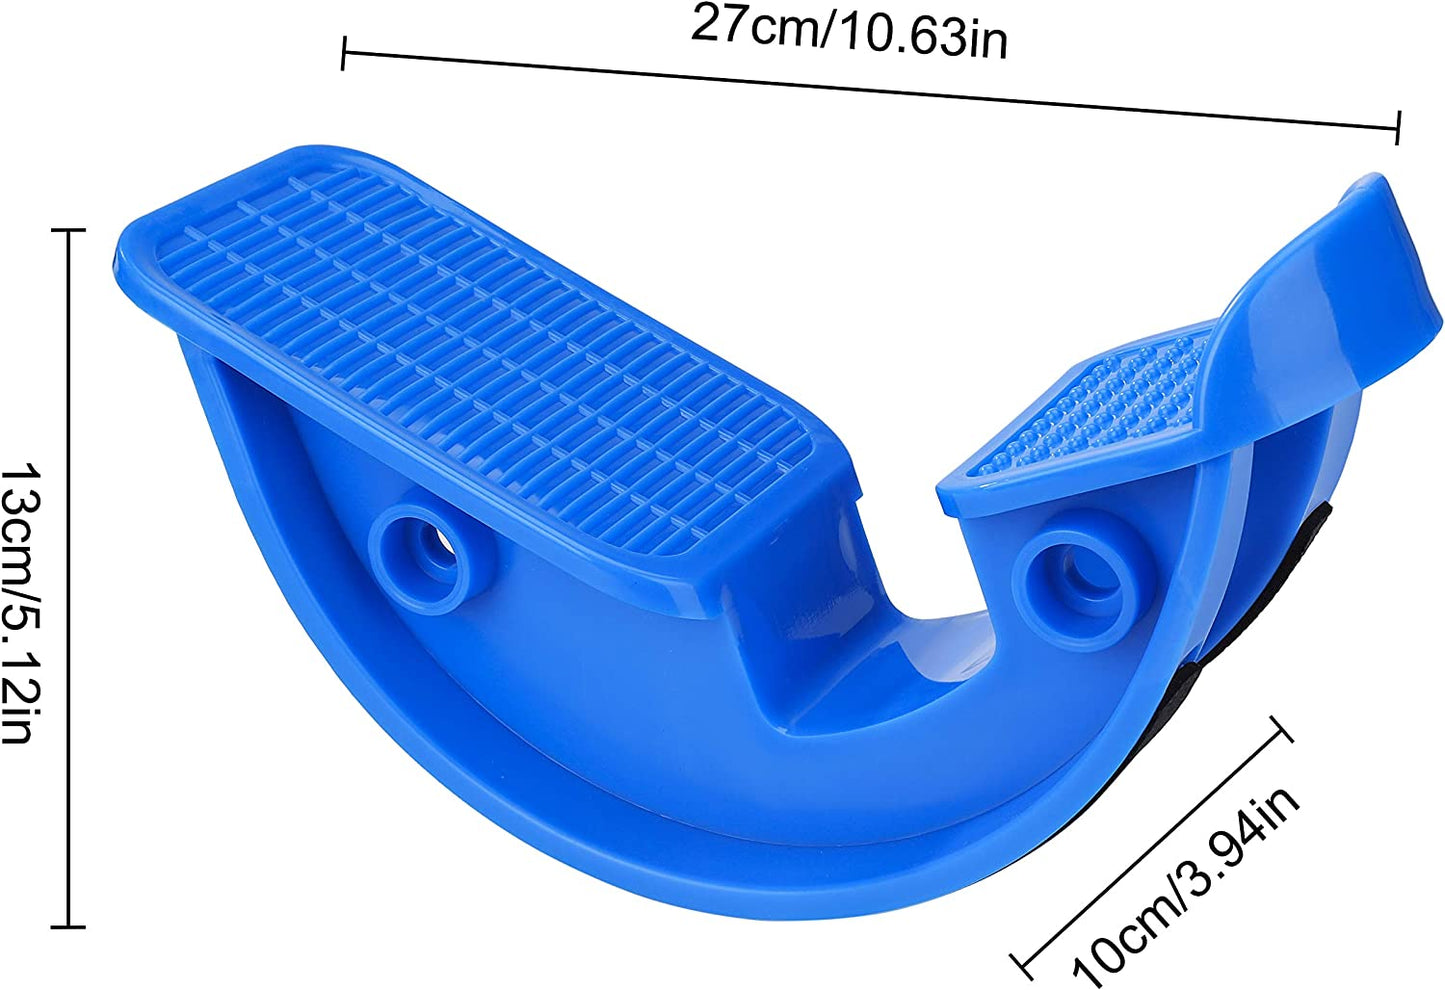 Foot Rocker Durable Calf Leg Stretcher for Achilles Injury Treatment, Tendon Heel, Heel Pain, Tendonitis Relief, Great for Athletes Physical Therapy and Increasing Flexibility and Strength (Blue)